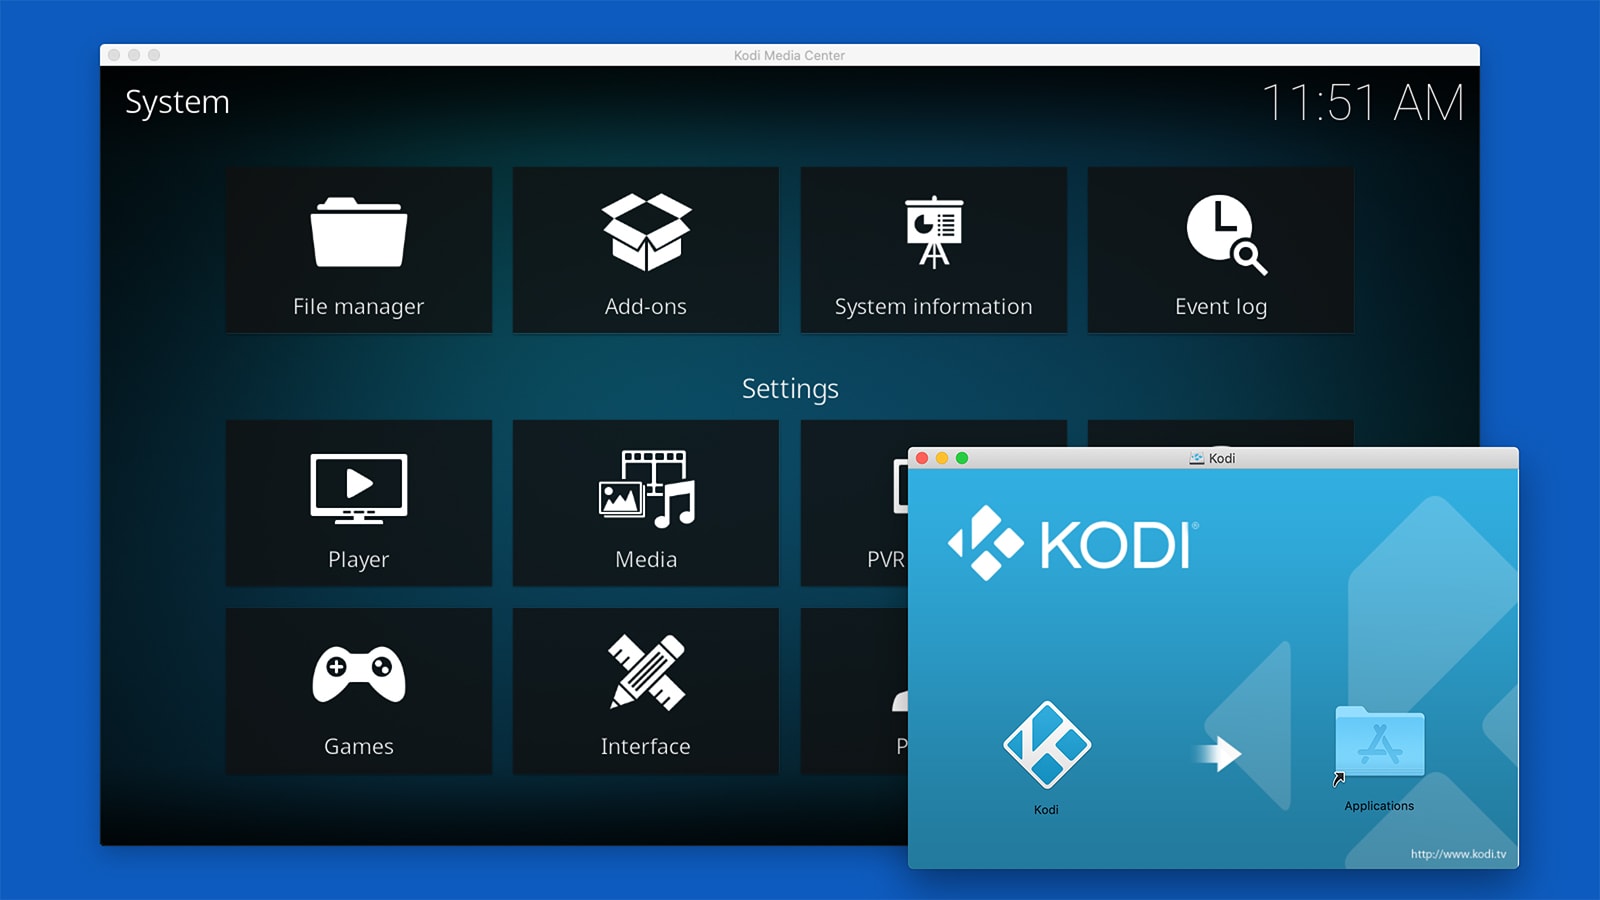 Check the version of Kodi and compare it to the latest version available on the official Kodi website
If there is an update available, download and install it